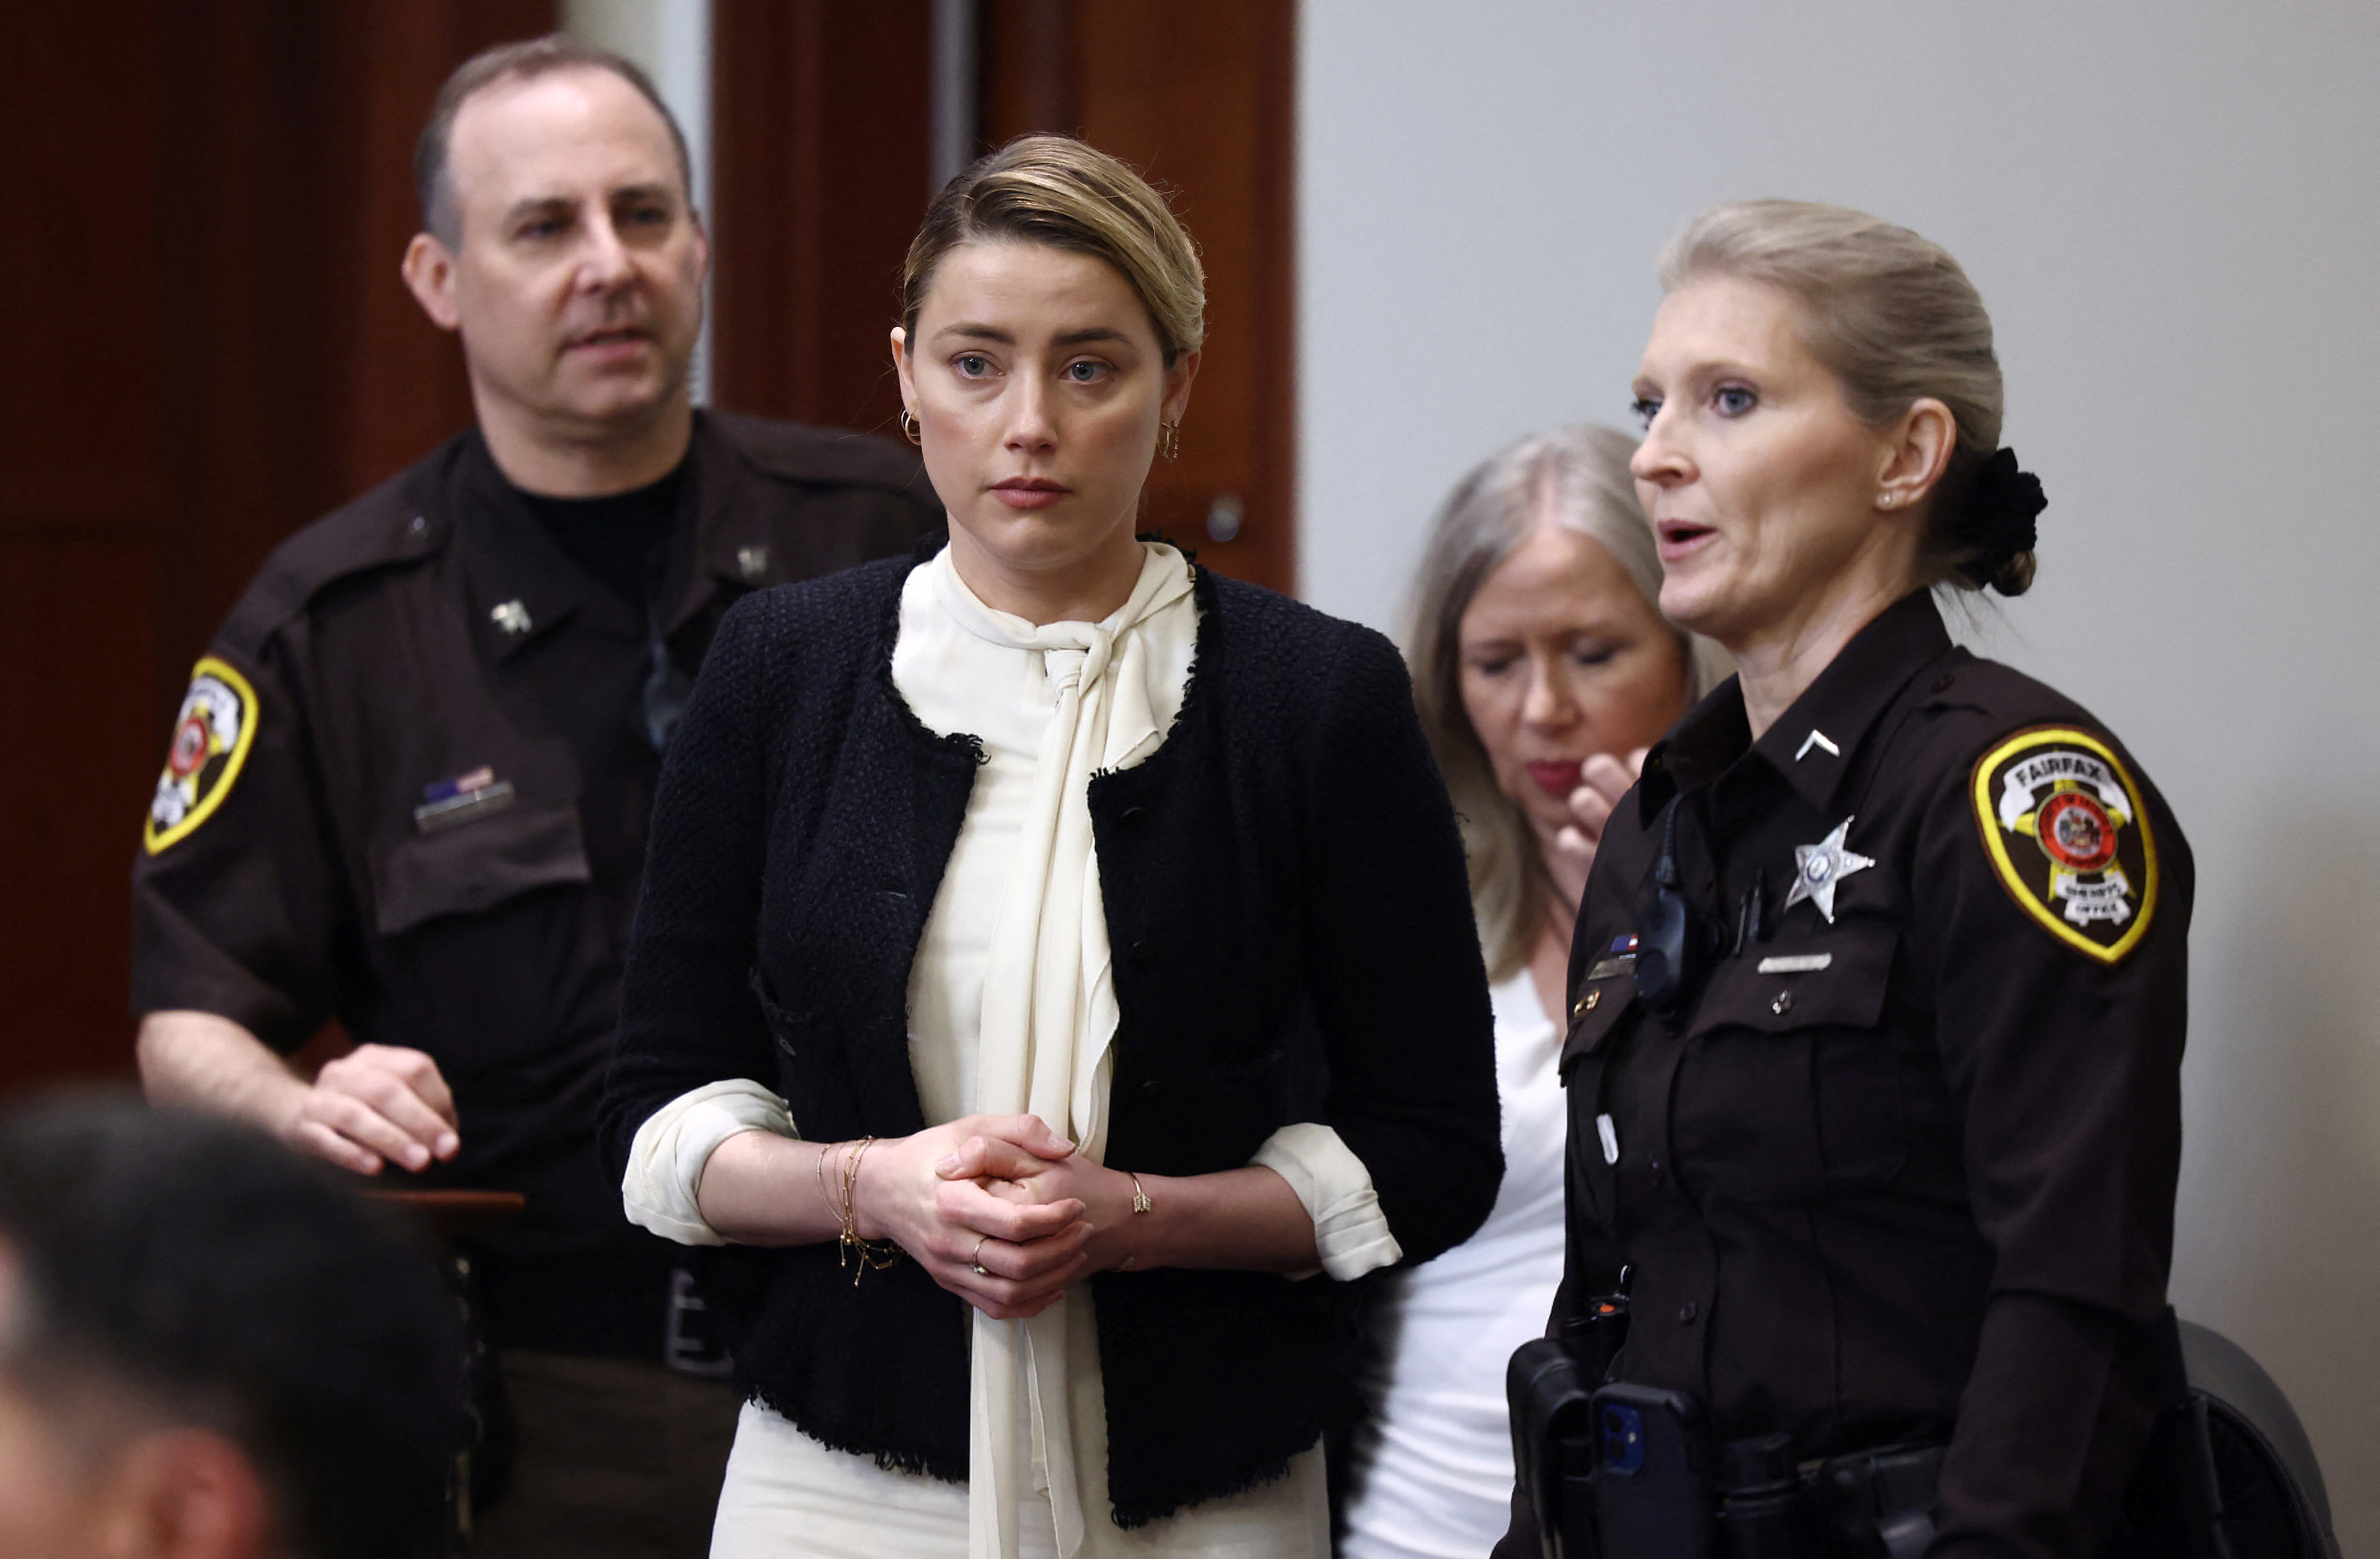 Amber Heard's return to the courtroom after a break in Fairfax County Circuit Court, Va. (Jim Lo Scalzo/REUTERS)